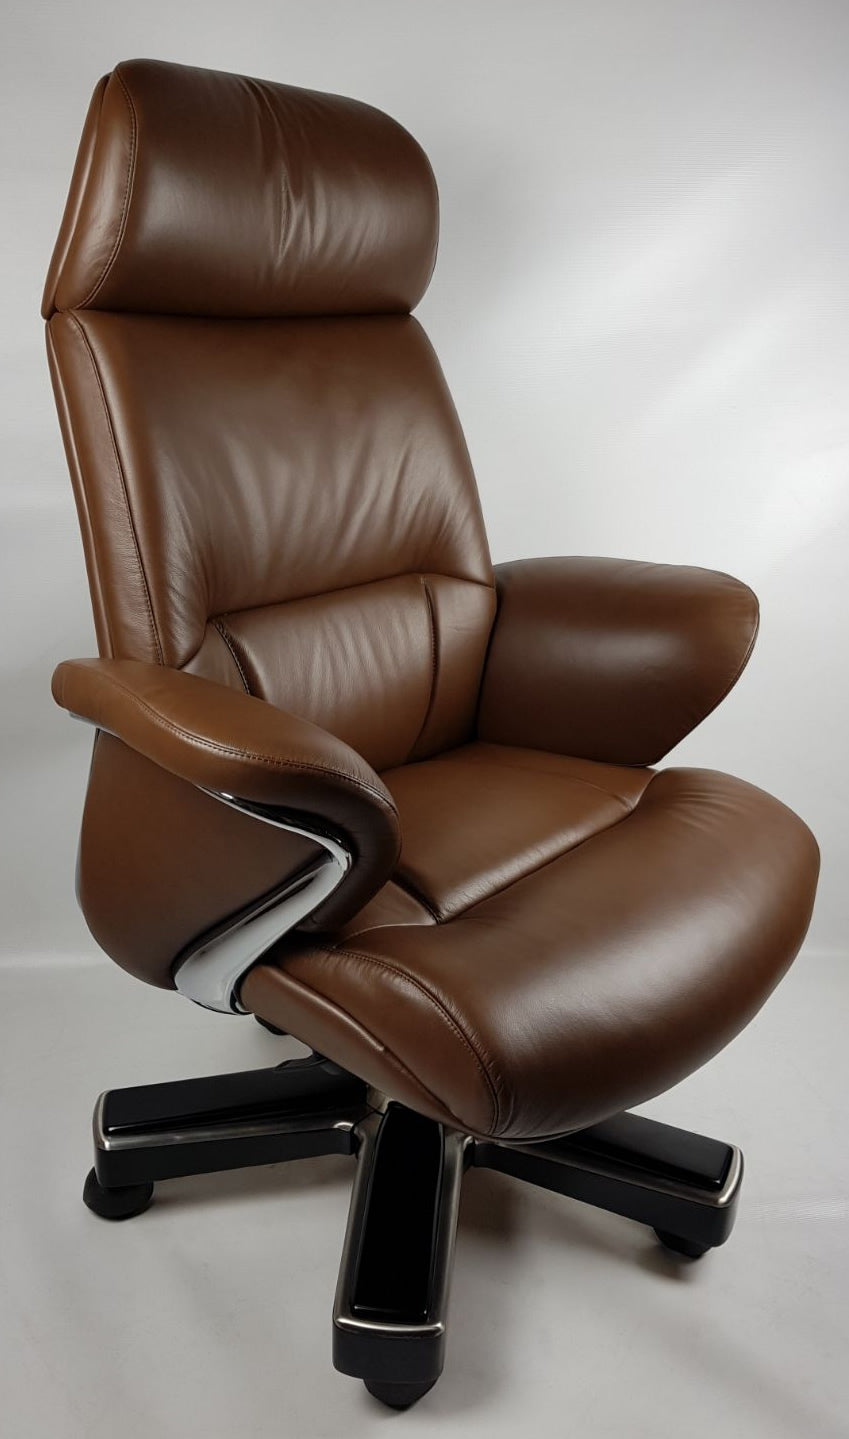 Large Luxury Executive Office Chair with Genuine Brown Leather - YS1605A North Yorkshire